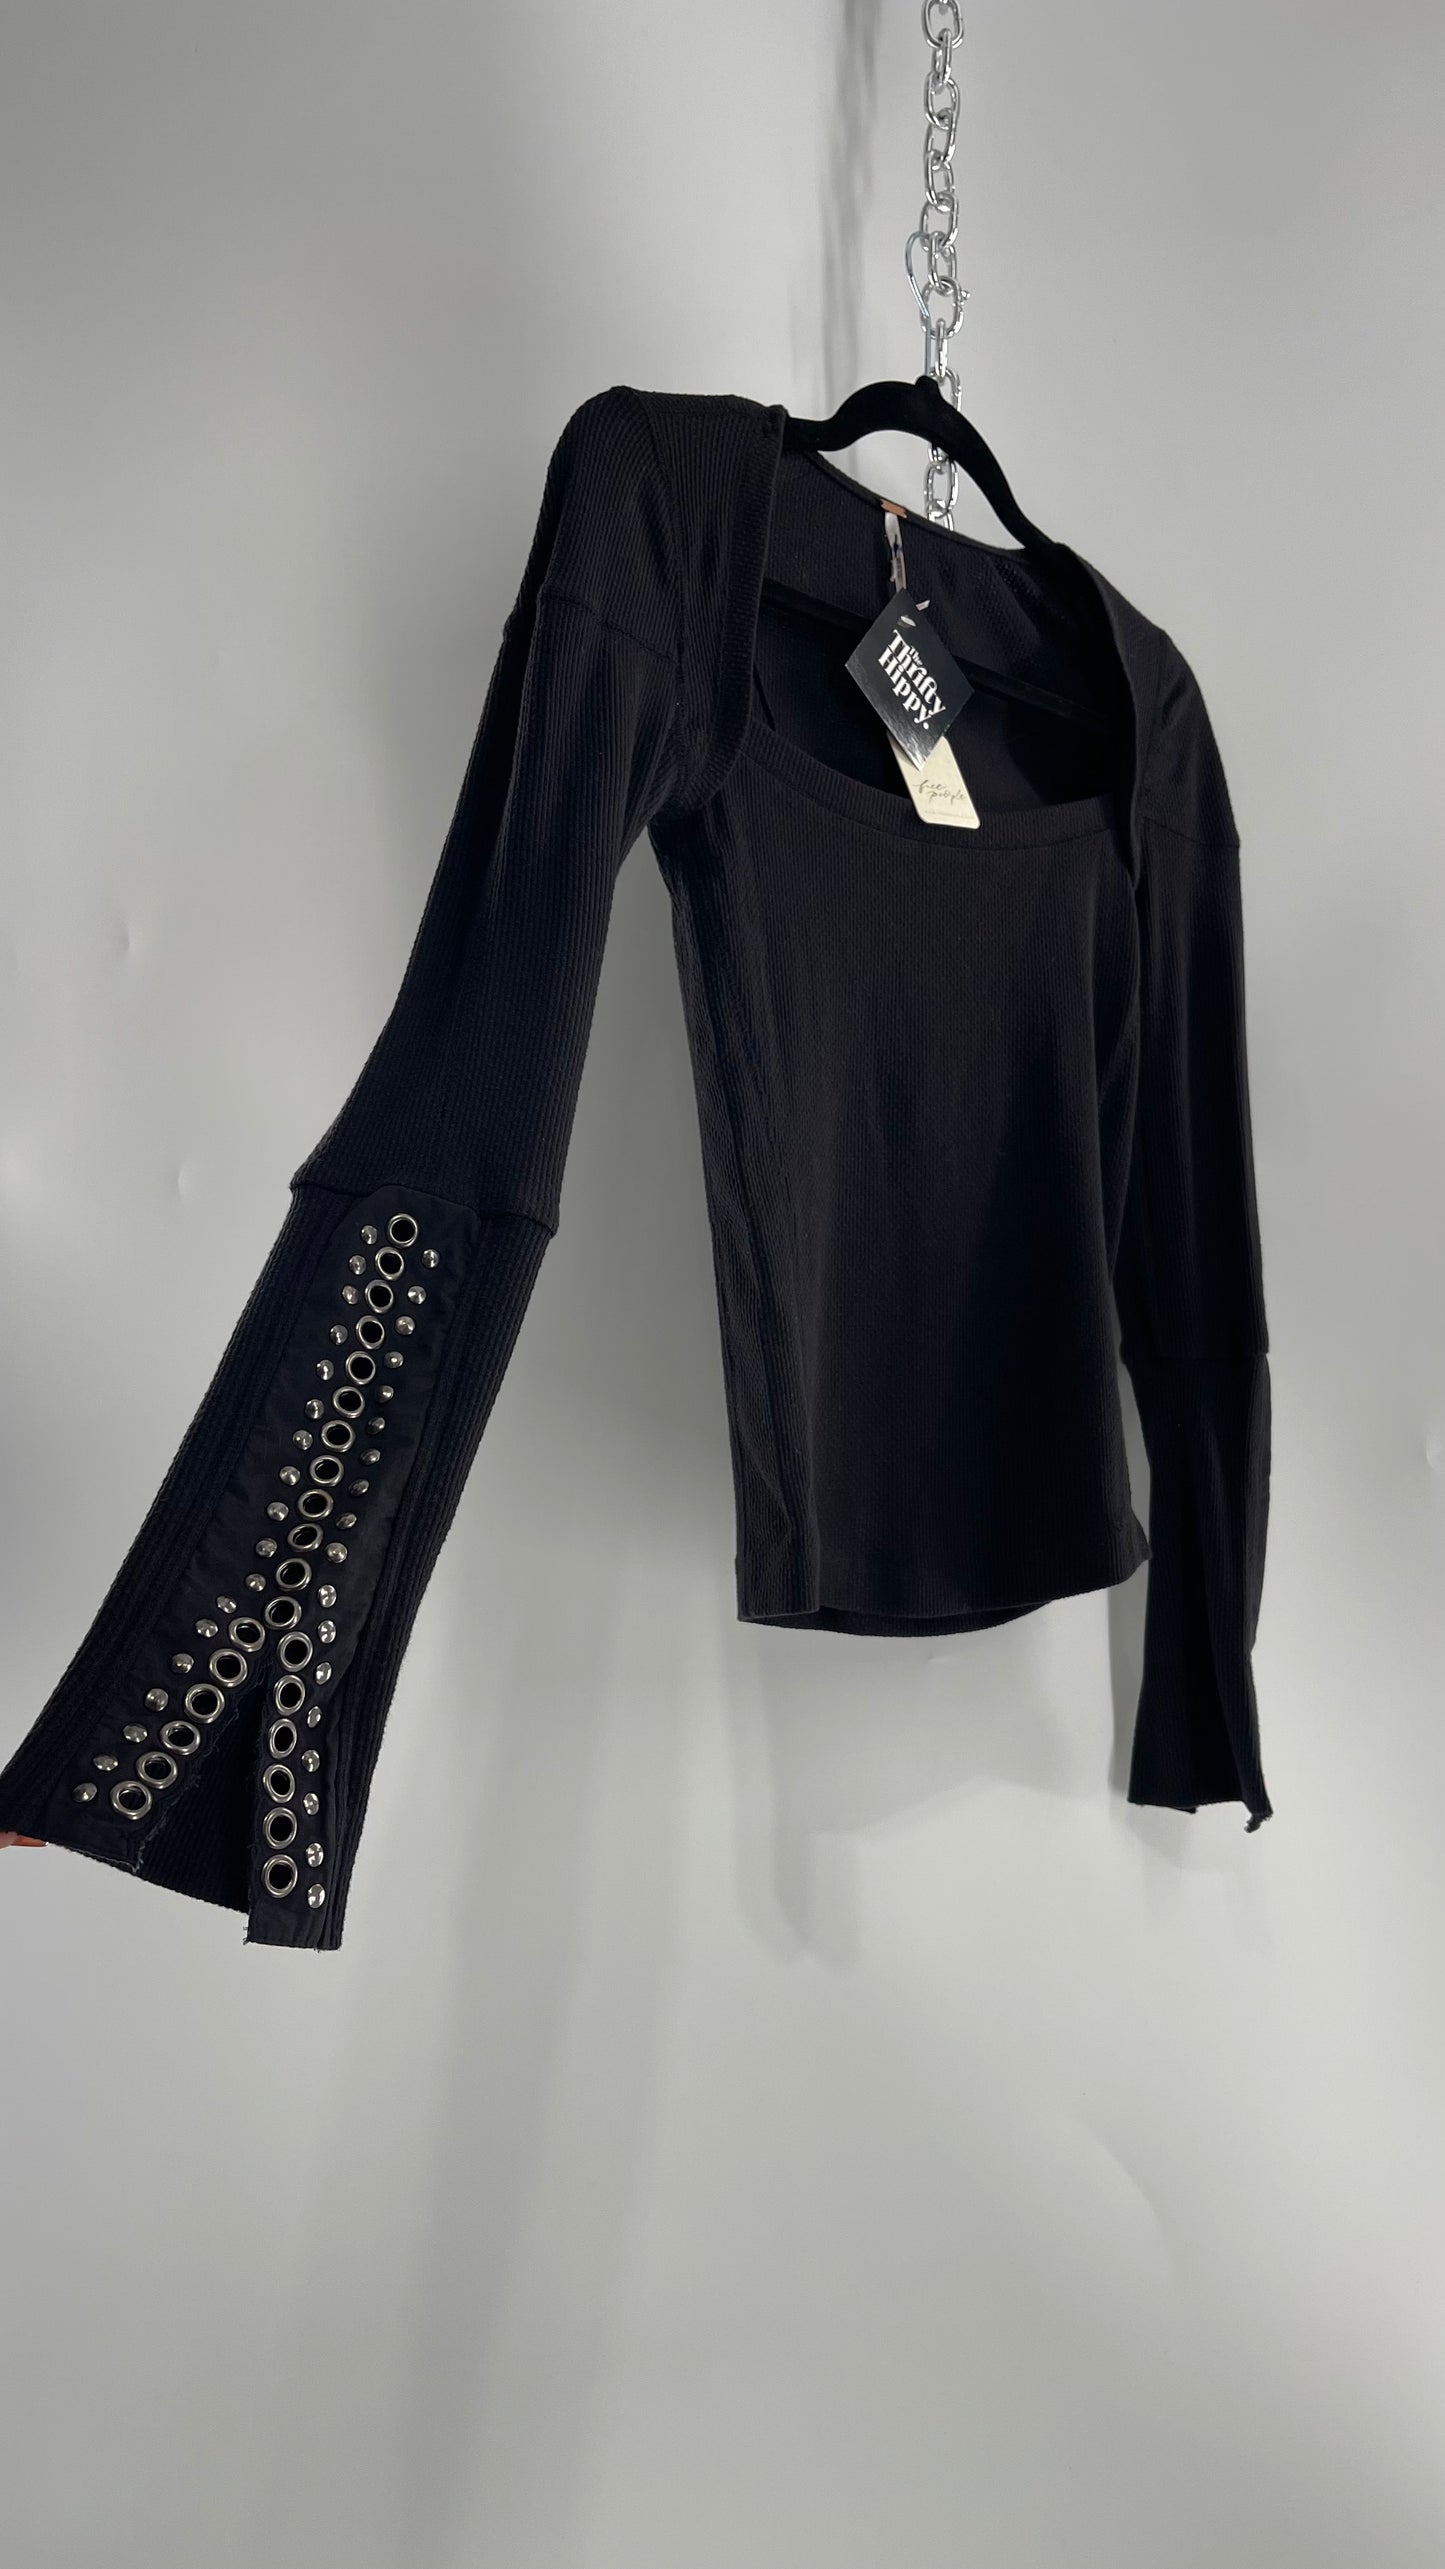 Free People Black Henley with Grommet and Studding Sleeve Cuff Tags Attached (XS)